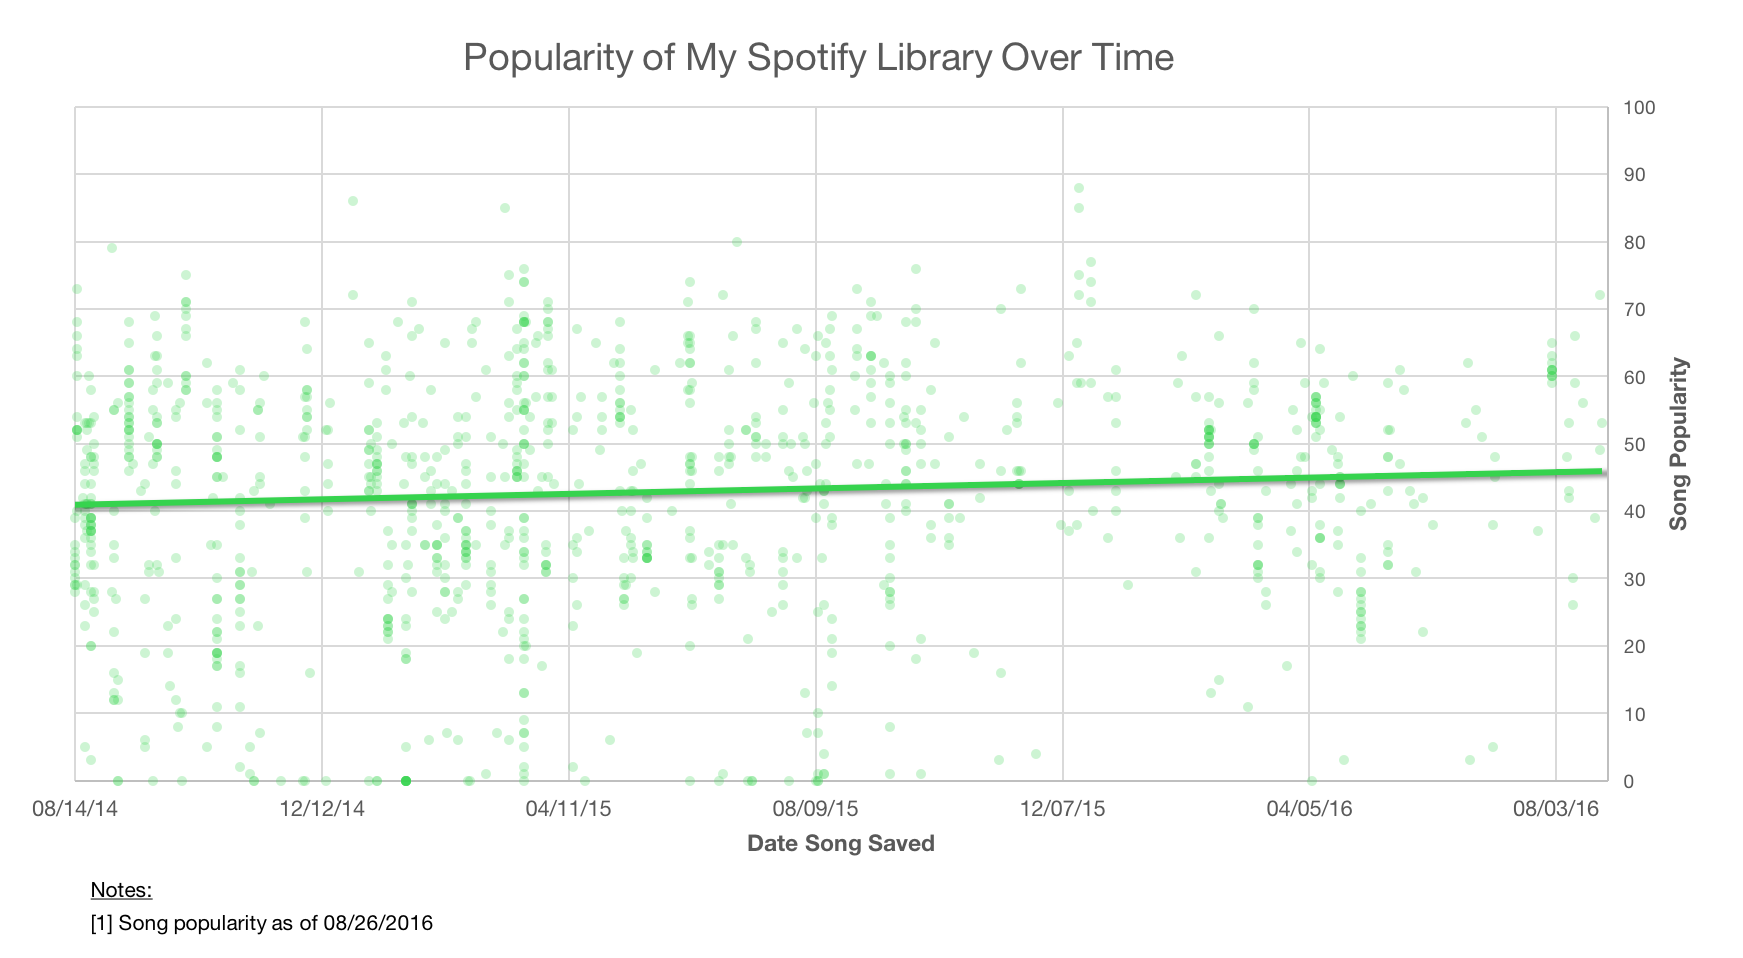 A graph of my Spotify popularity over time